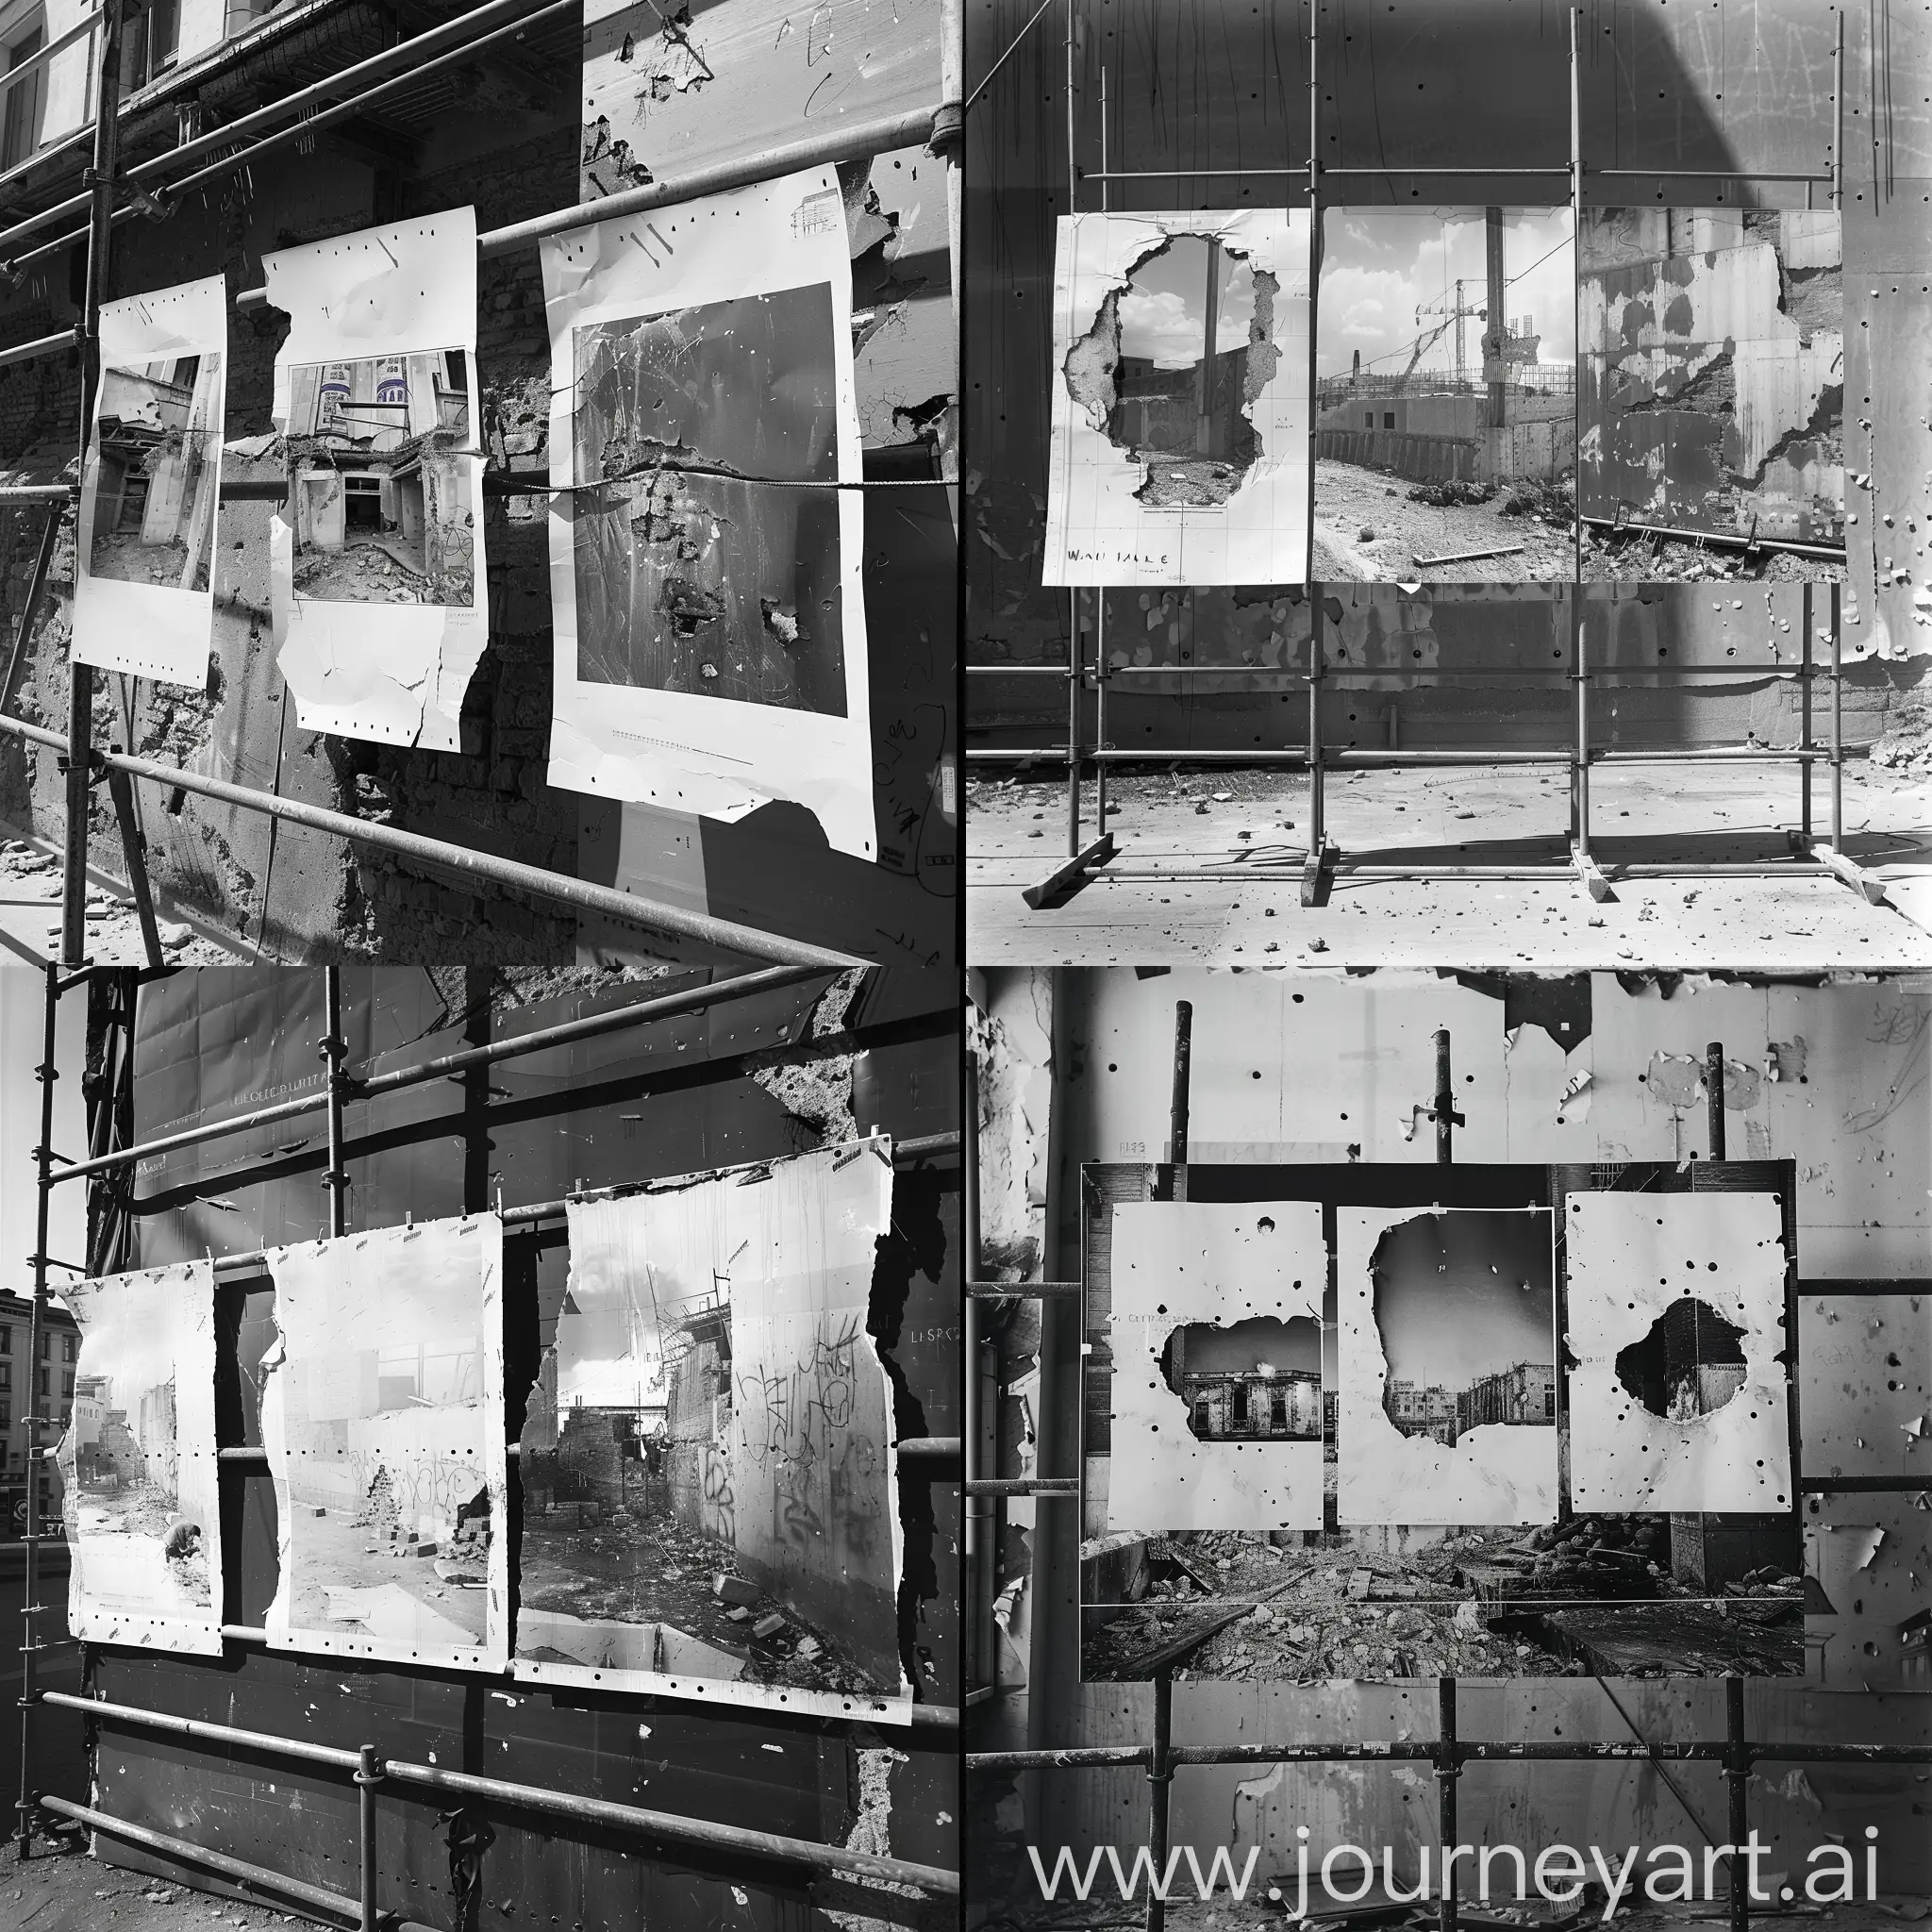 black and white analogue photo exhibition about wide photos of construction sites that 3 big photos are attached to a scaffolding in front of a wall and the pictures have some small holes and tears on them and behind the holes some more photos can be seen through these holes